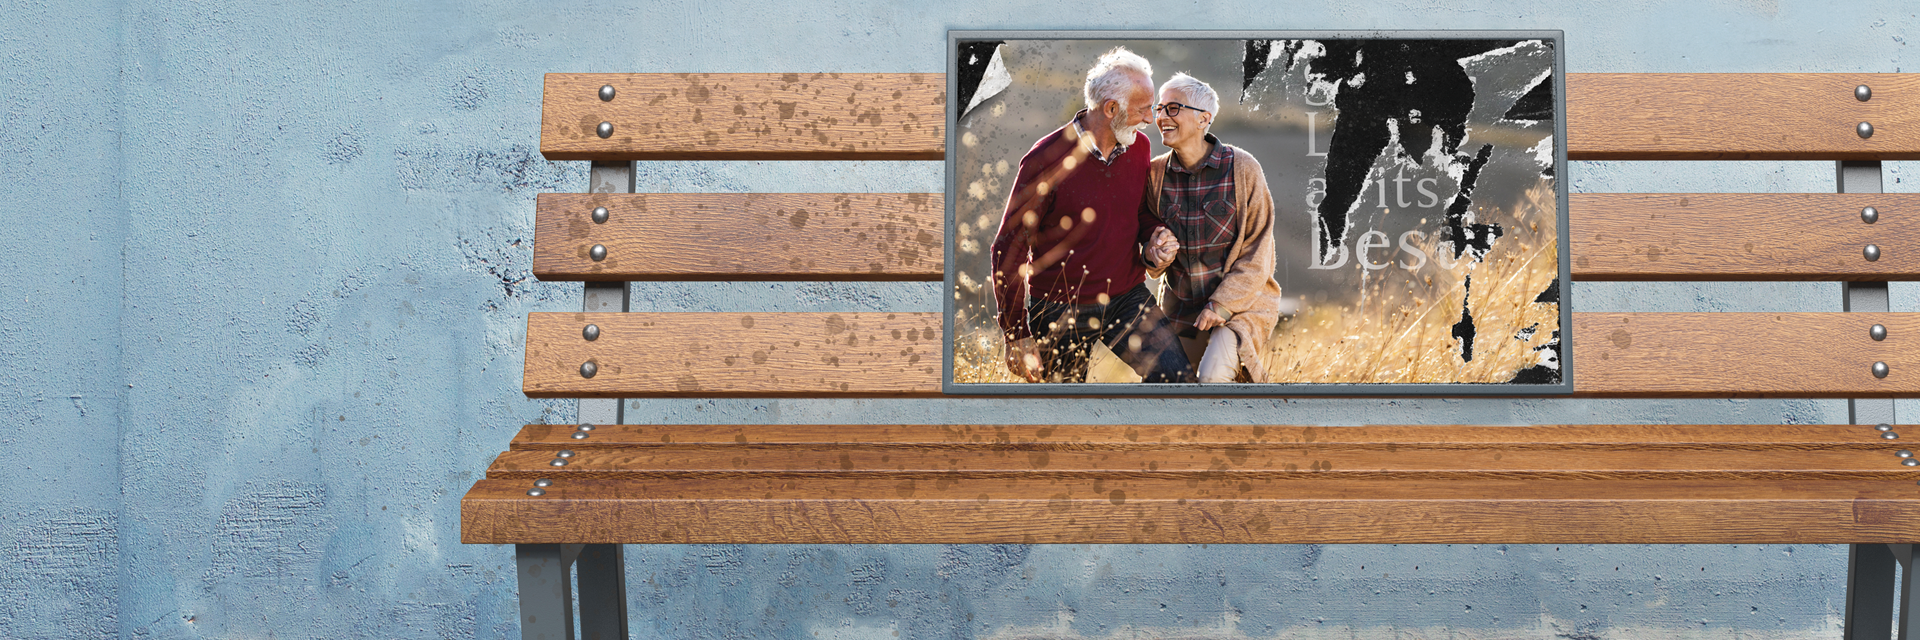 detail of image showing an empty park bench that has a weathered ad for assisted or independent living for older adults